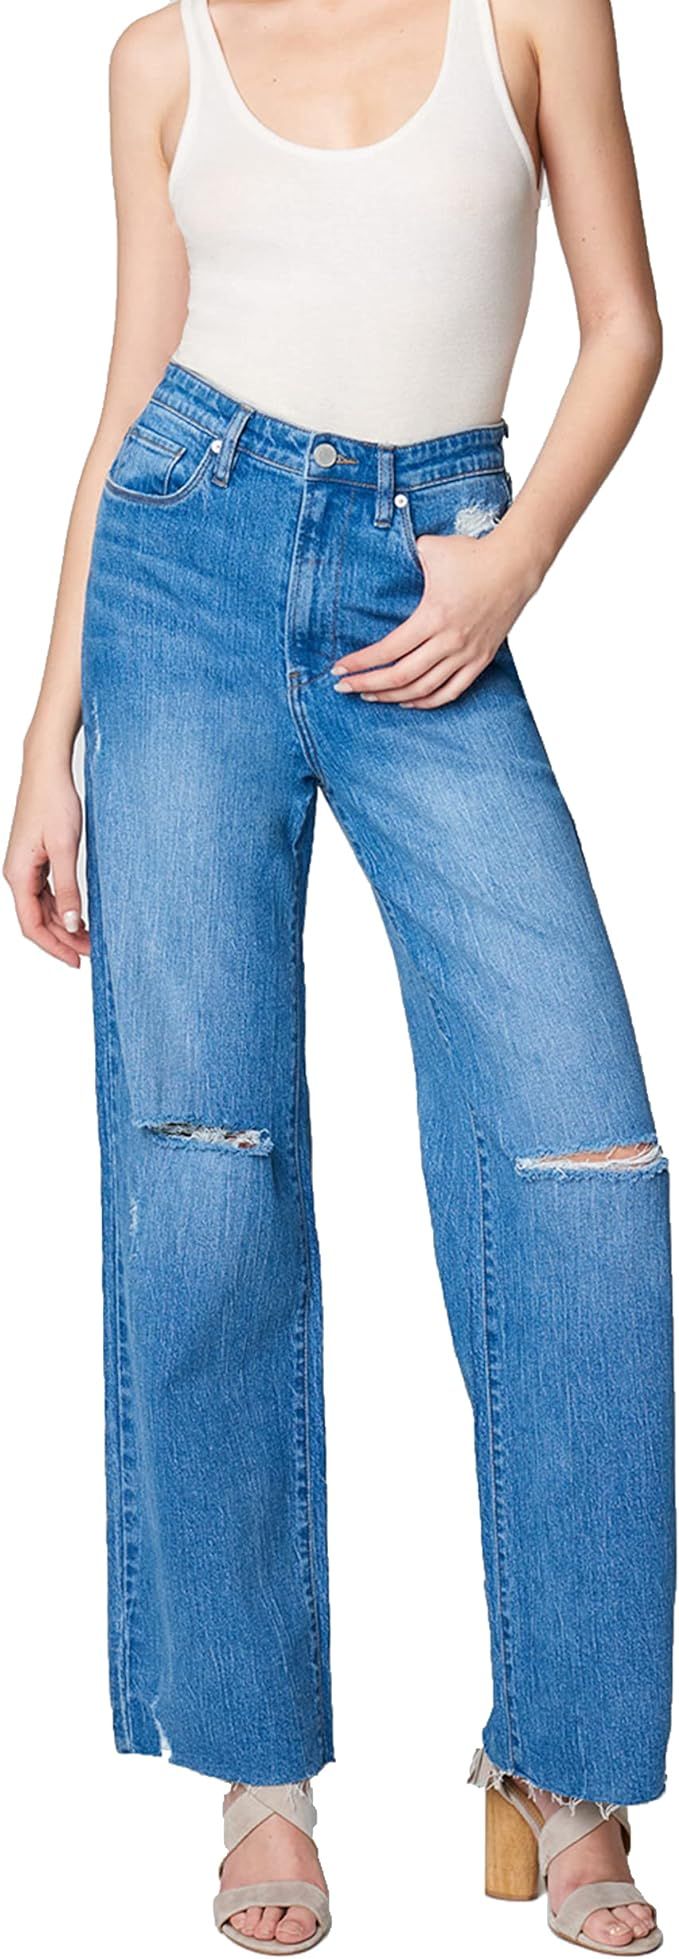 [BLANKNYC] Womens Five Pocket Wide Leg Jean with Rips at Knee, Fashionable & Stylish Pants | Amazon (US)